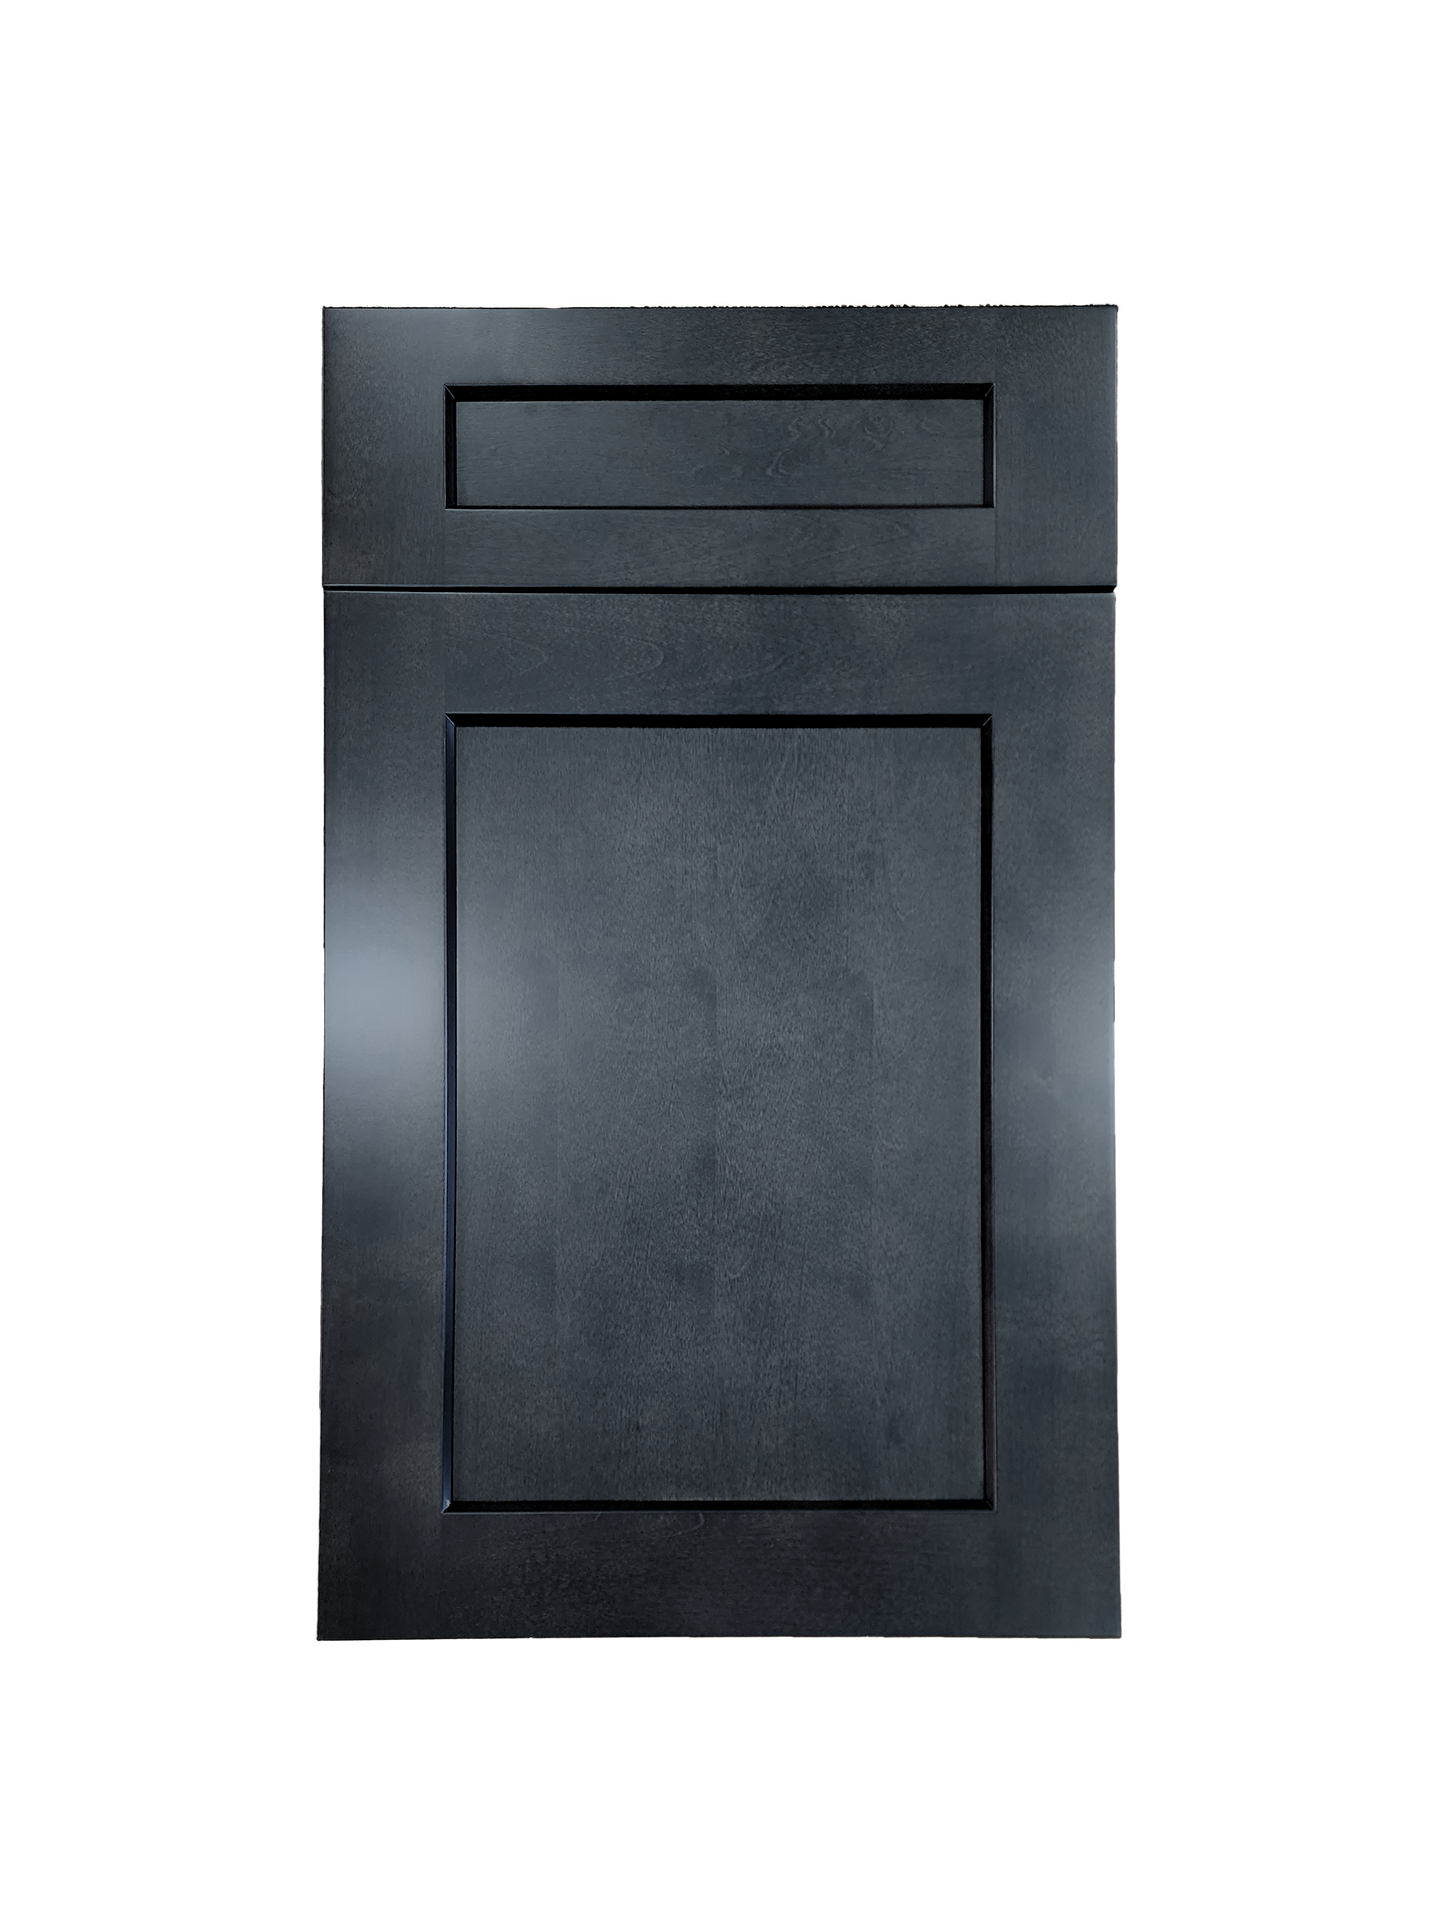 Stormy Grey Base Pantry Pullout 9 inches wide 24 inches deep 34.5 inches tall with Stormy Grey box and Stormy Grey doors